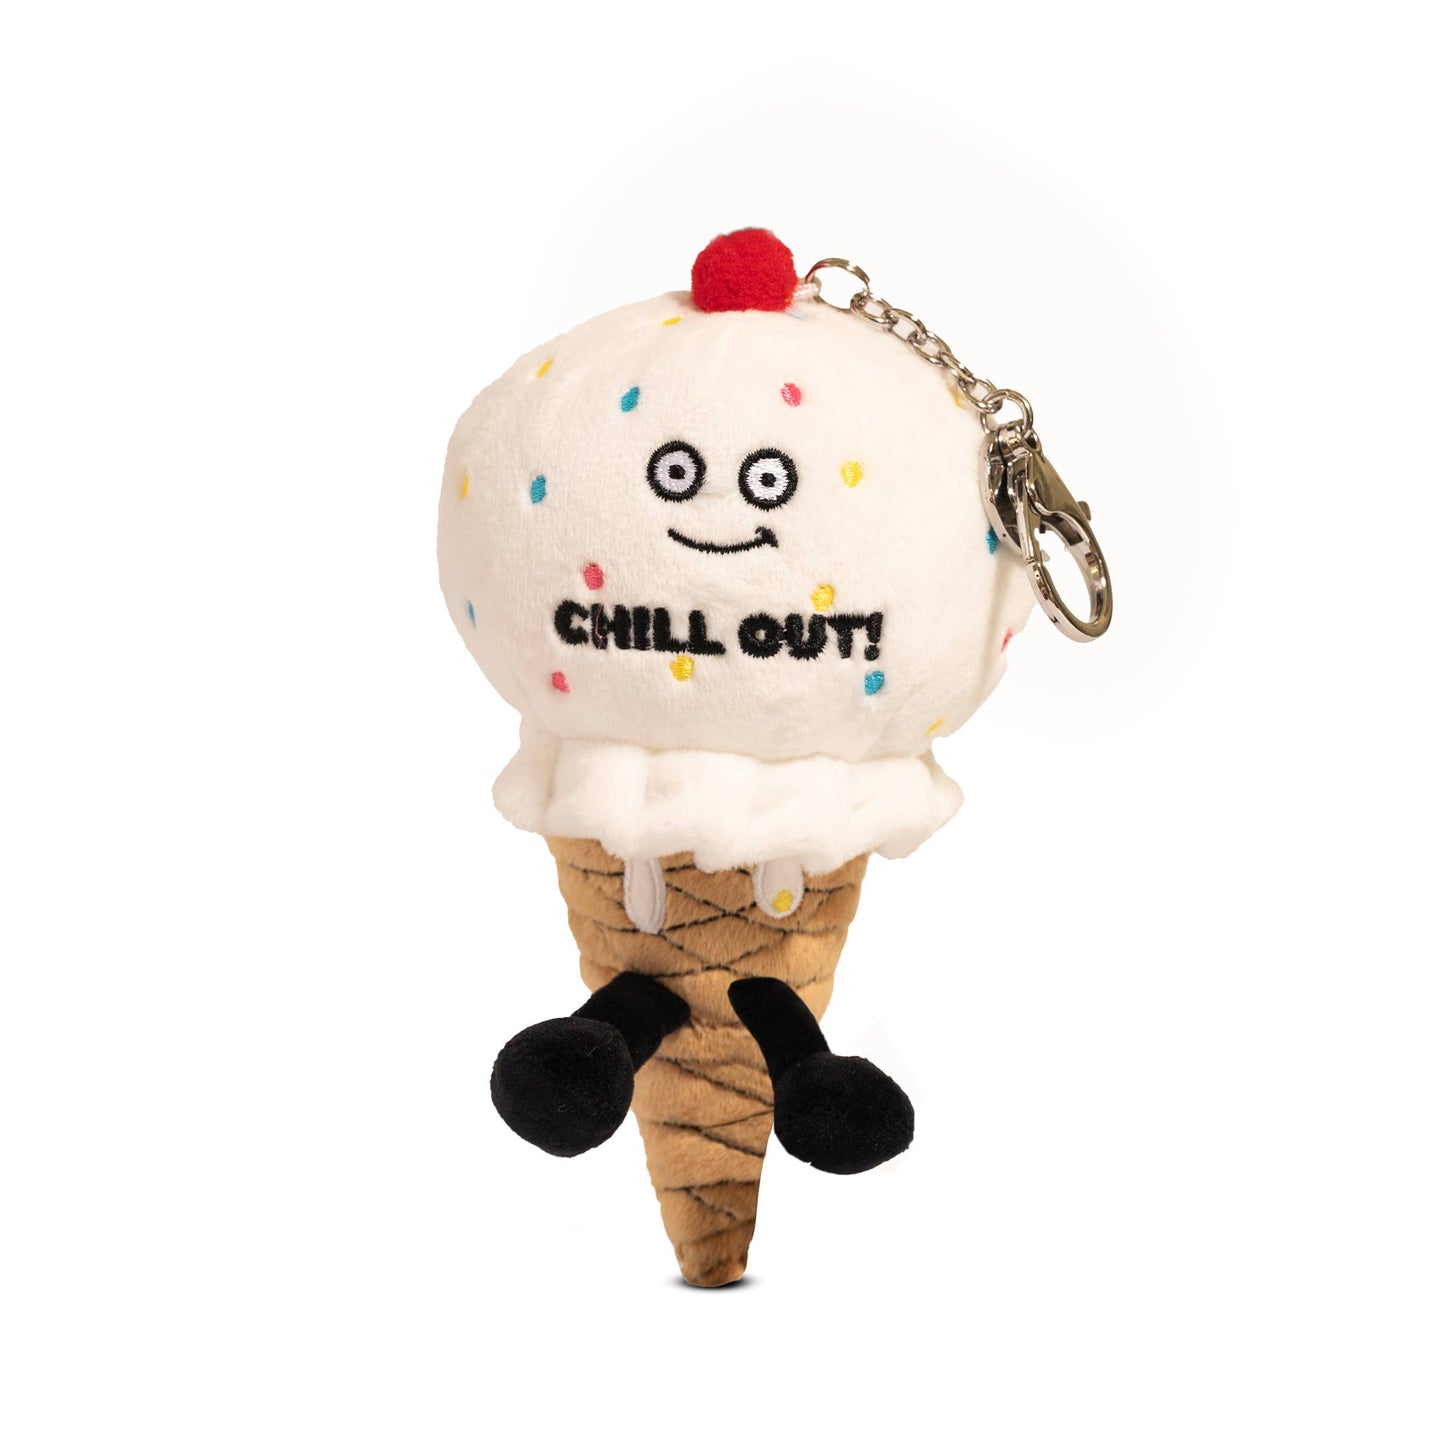 Chill Out Bag Charm Keychain